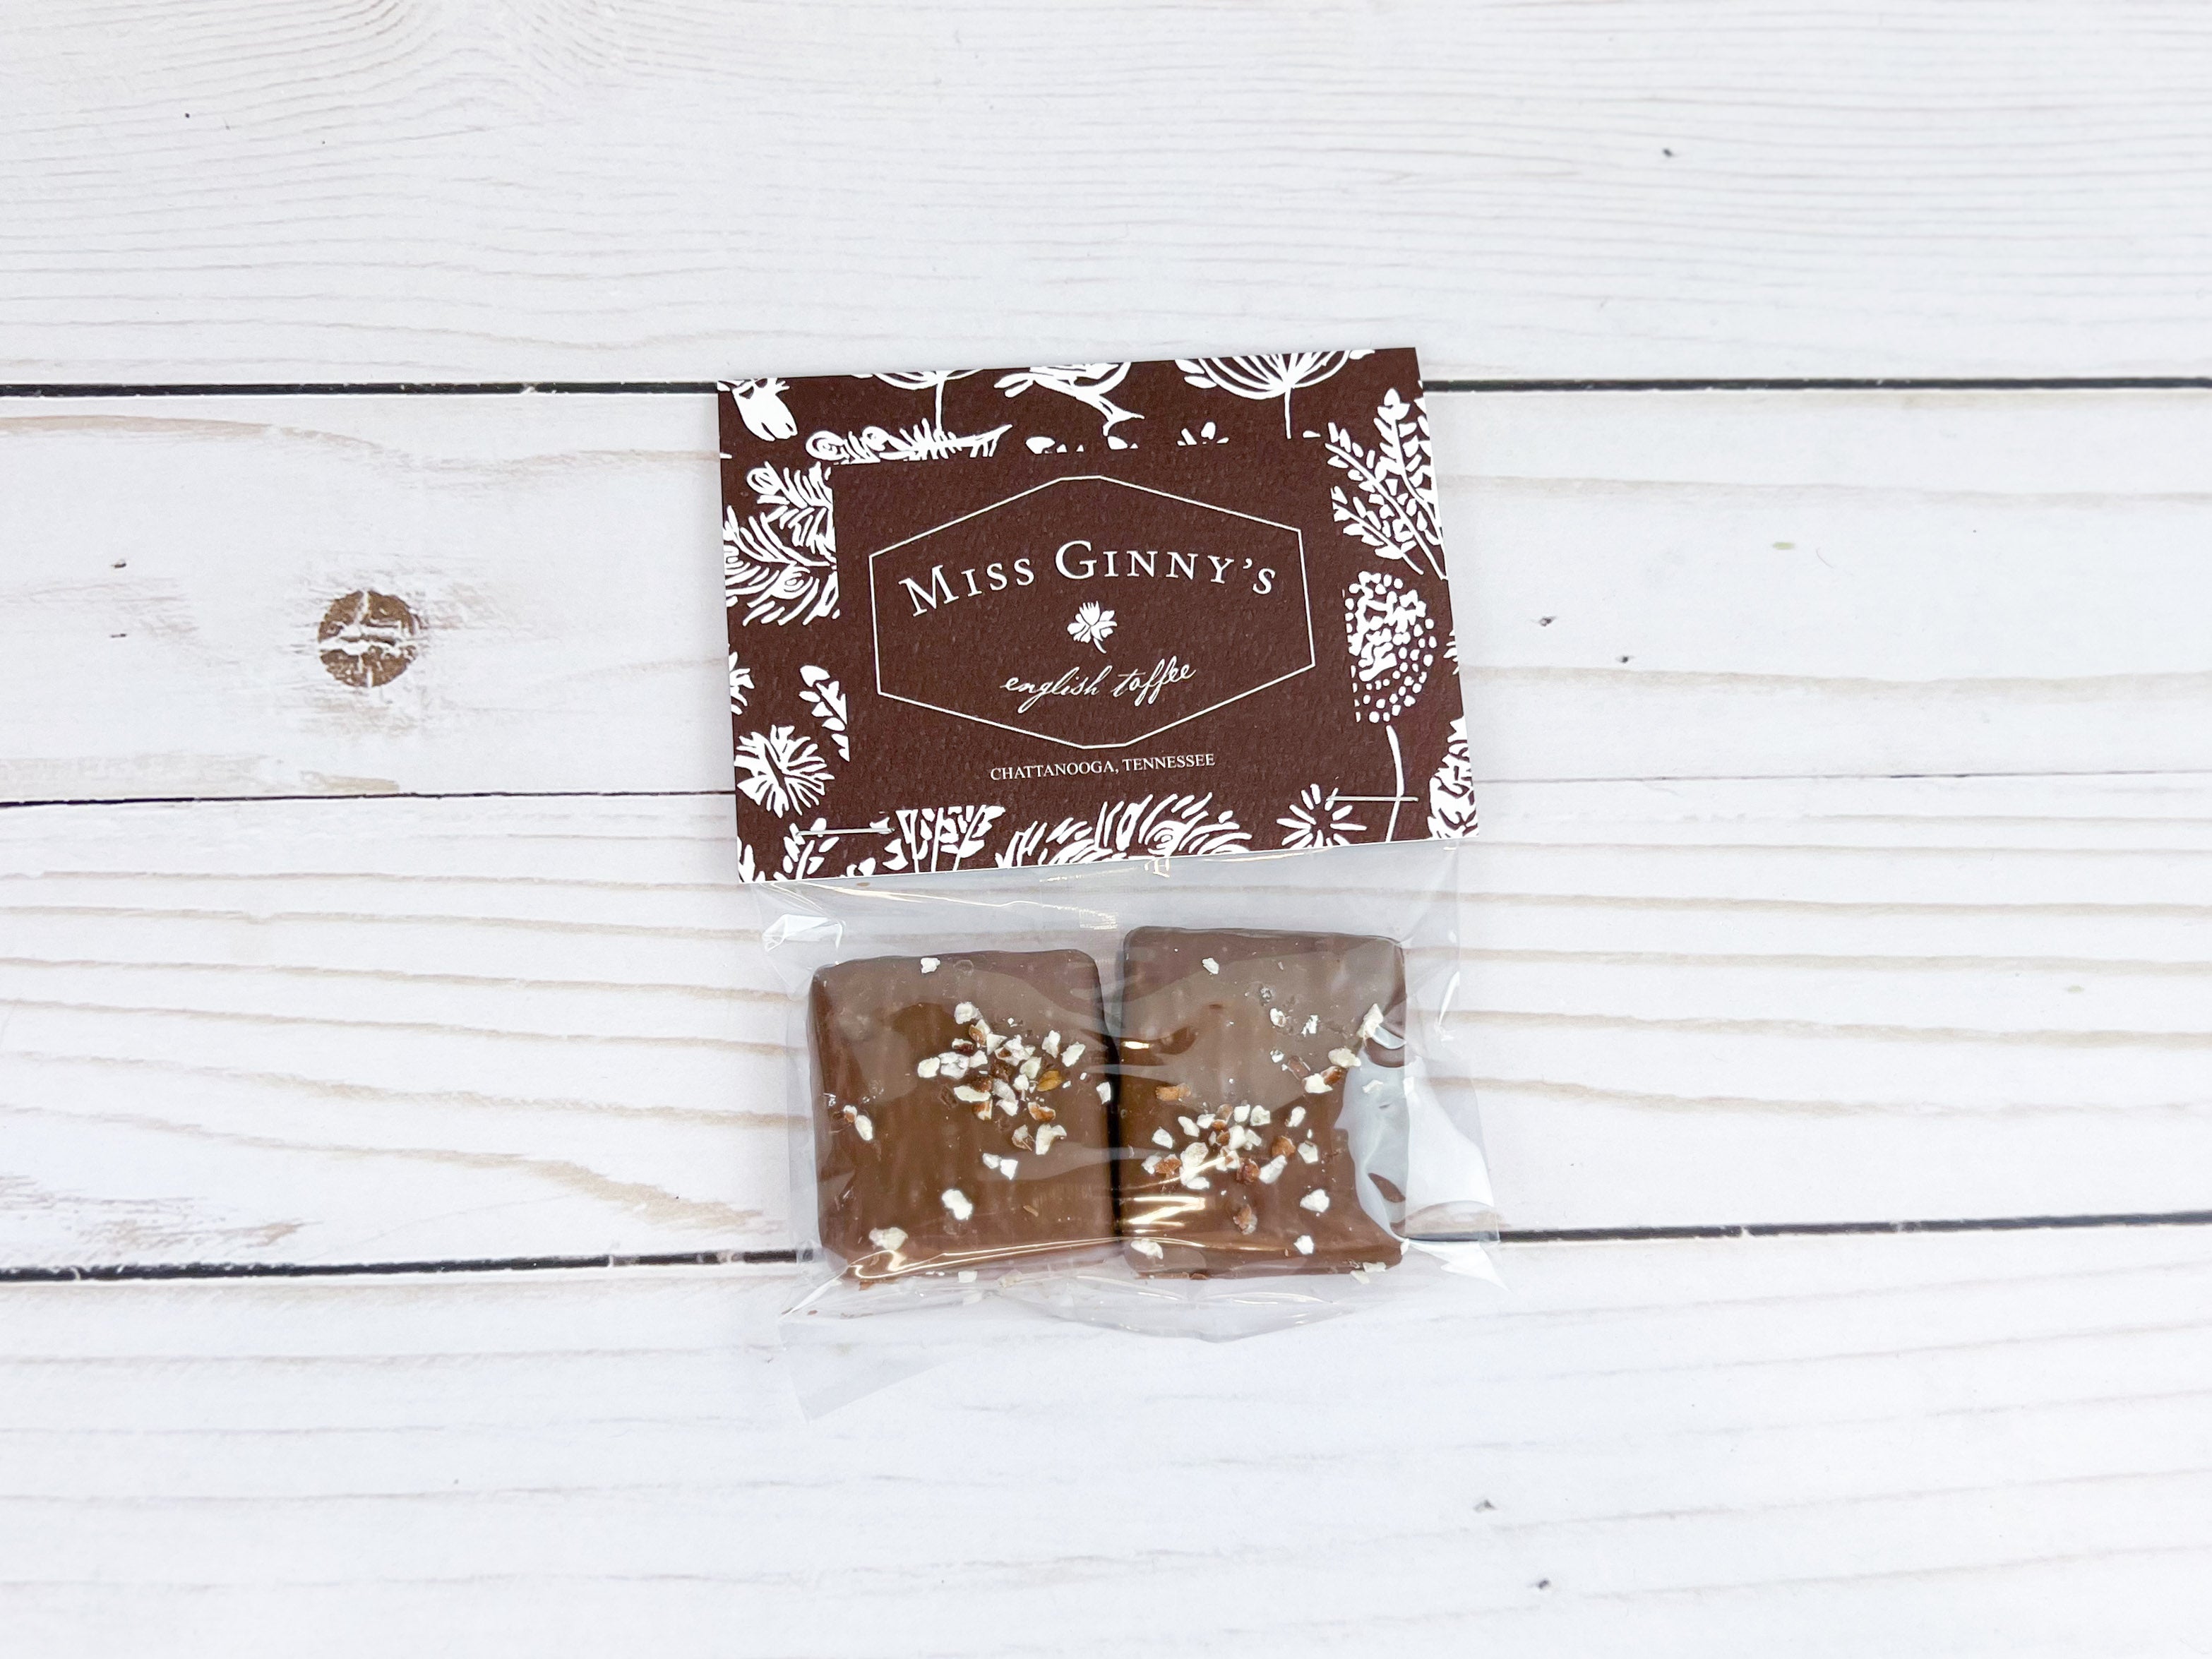 Miss Ginny's English Toffee